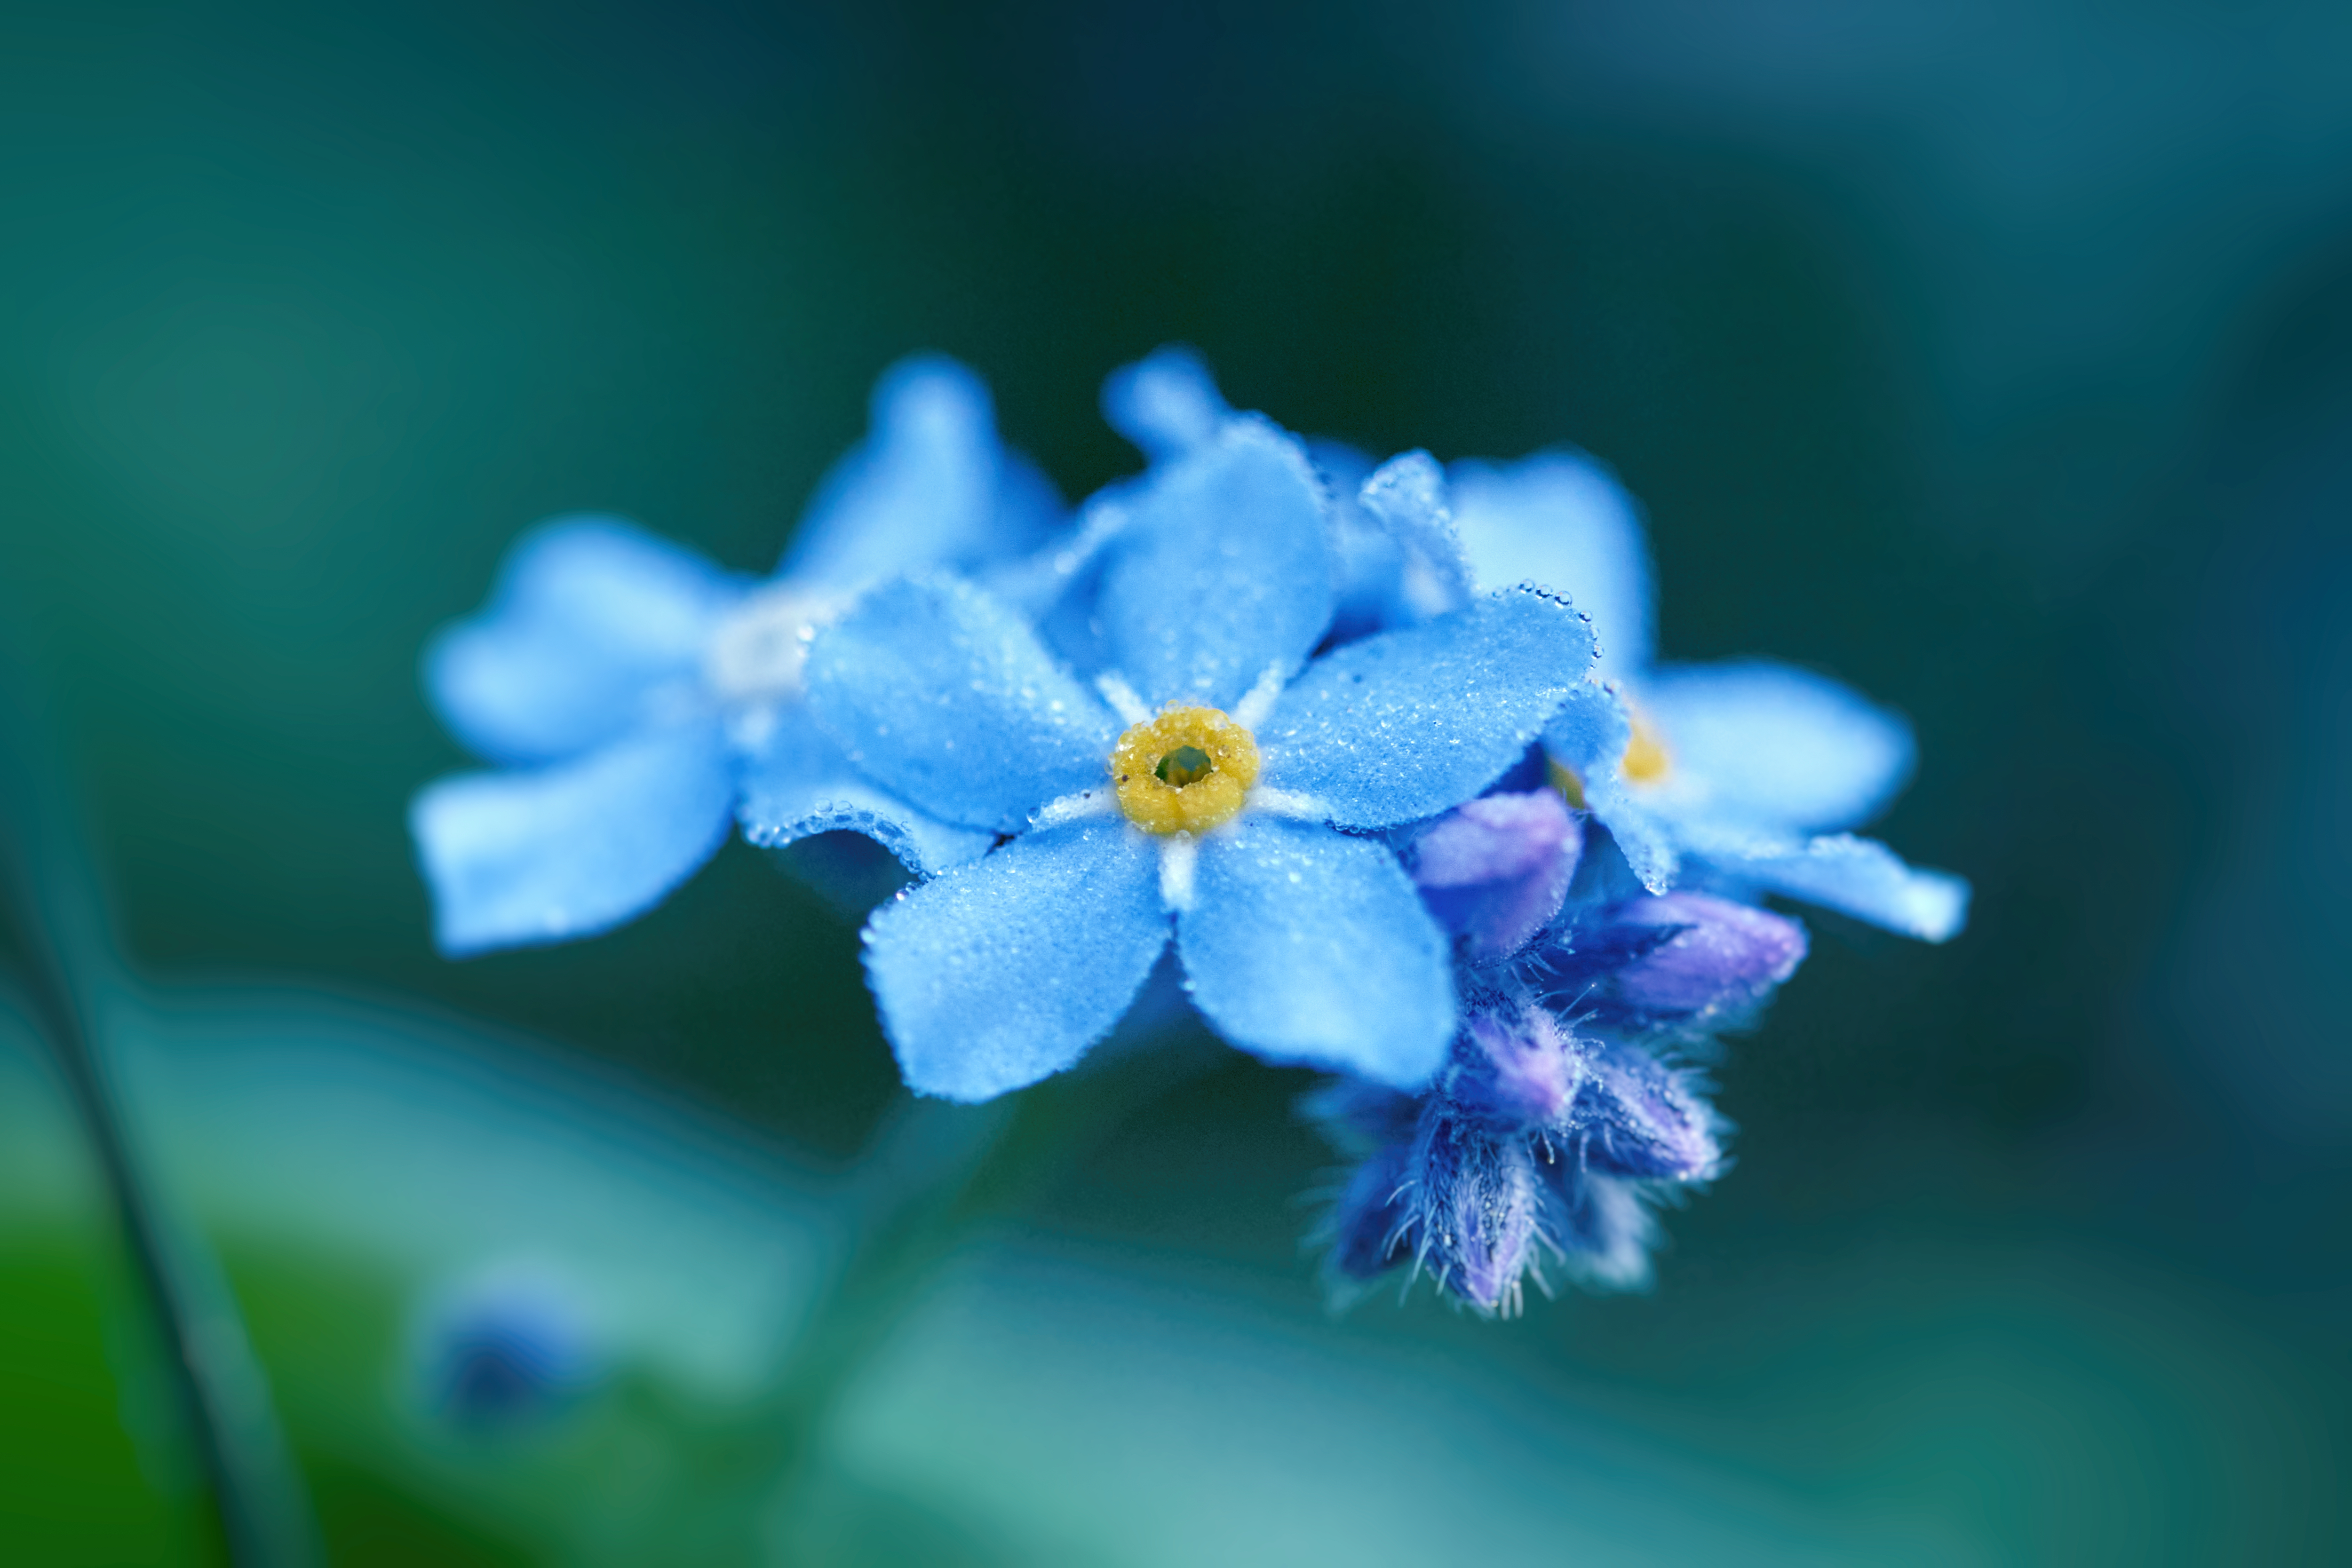 Macro shot of a small blue flower